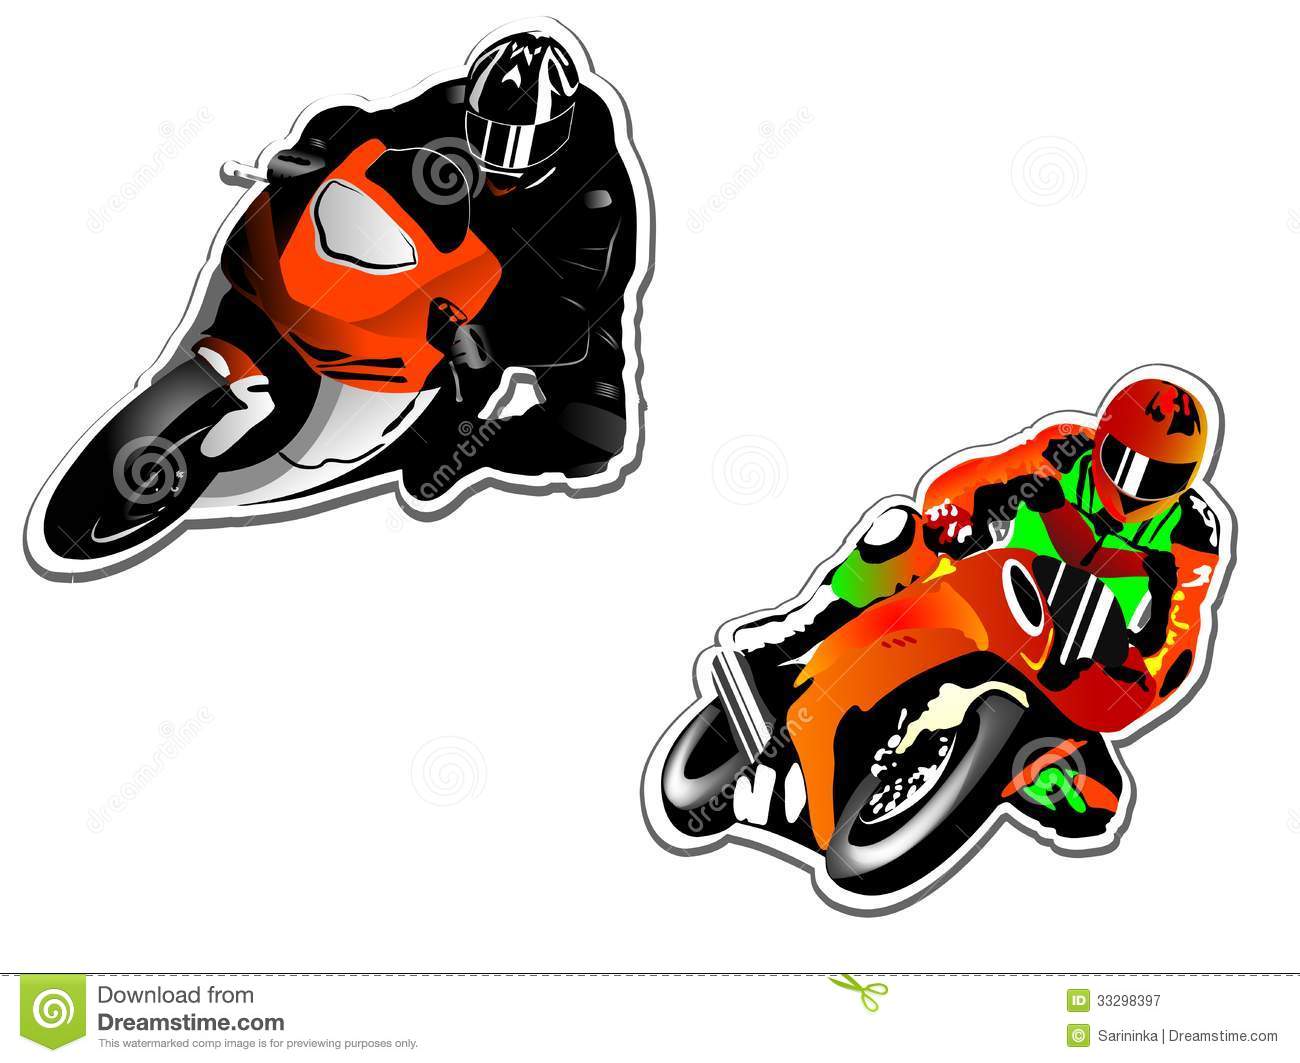 Free Motorcycle Vector Illustration